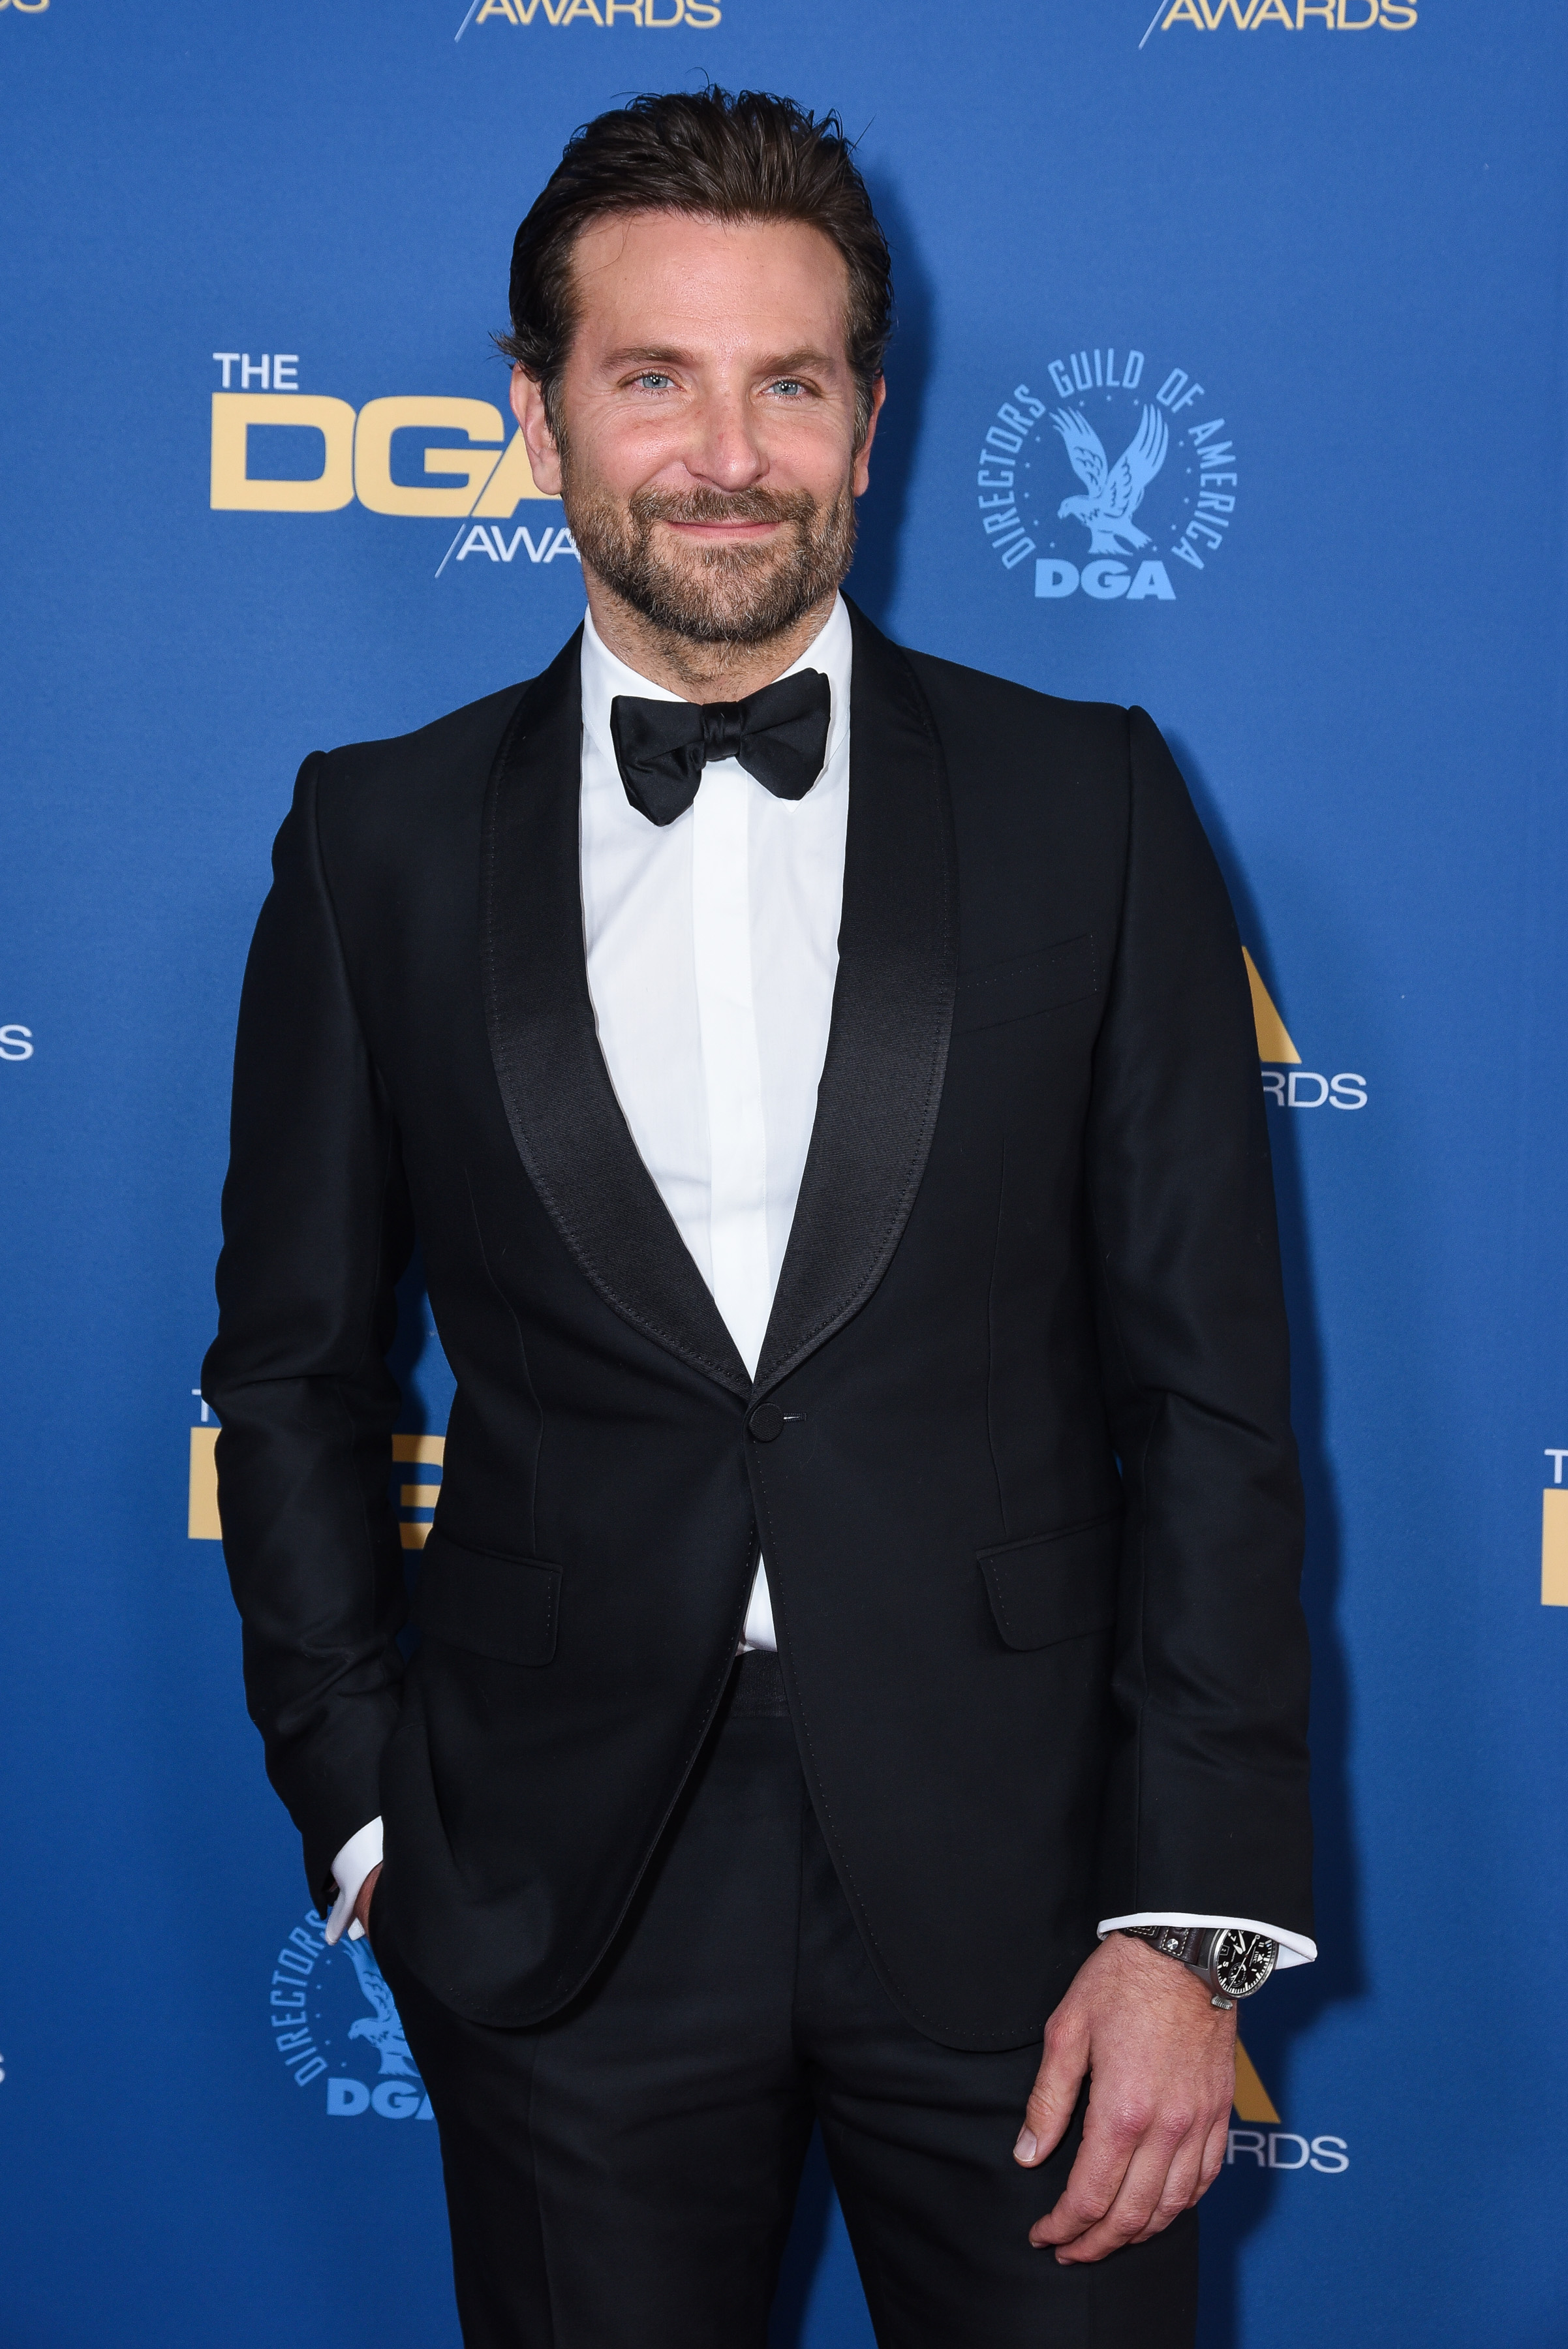 Bradley Cooper at the 71st Annual Directors Guild Of America Awards in Hollywood, California on February 2, 2019 | Source: Getty Images